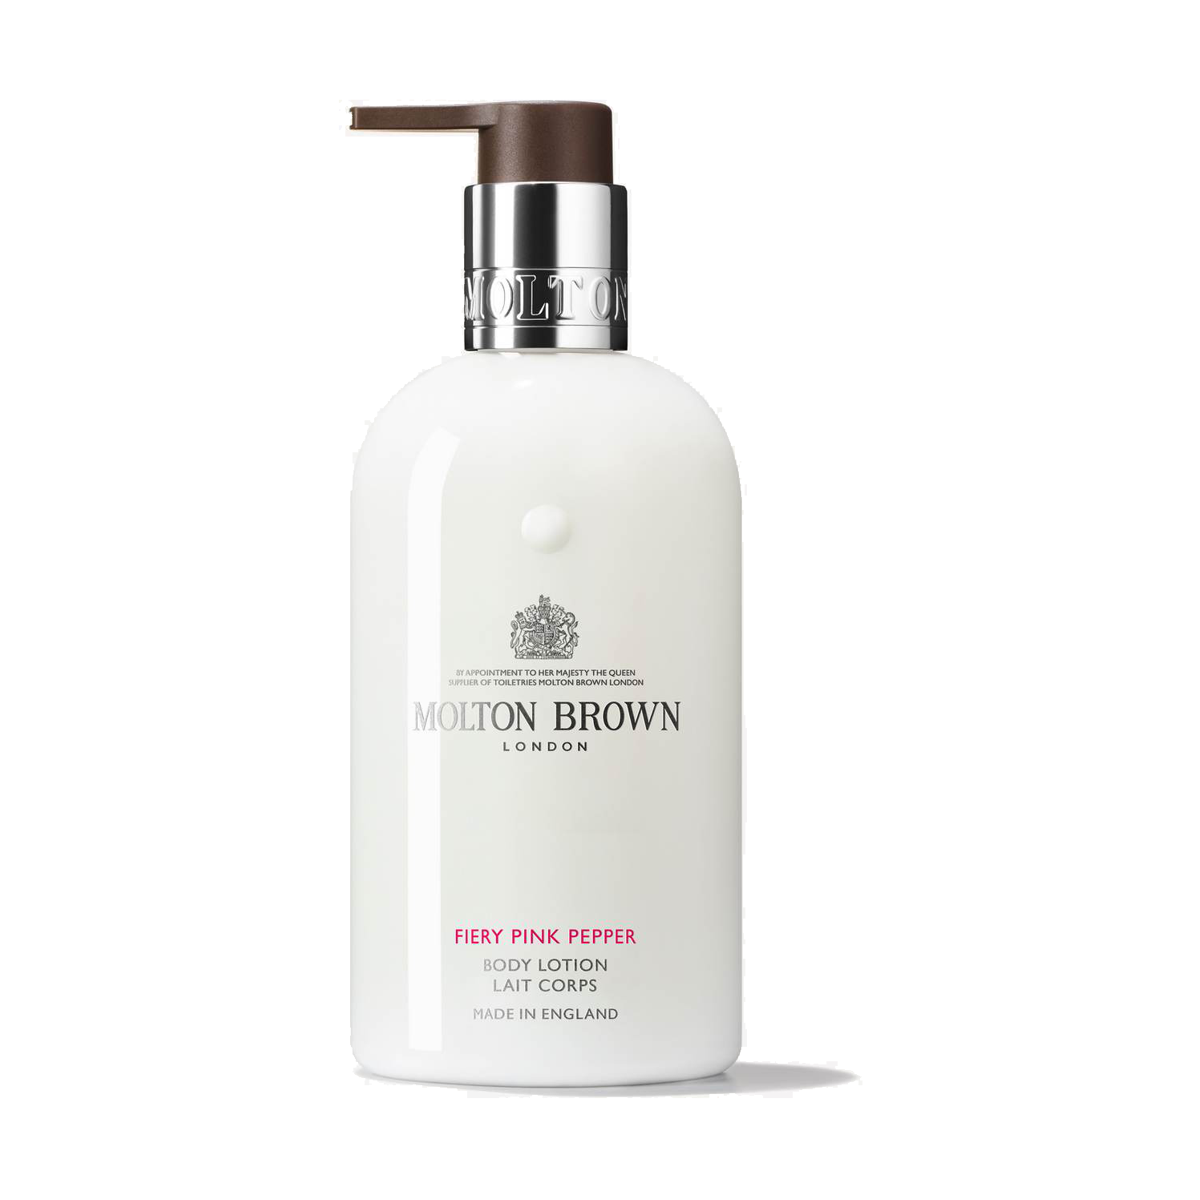 Molton Brown Fiery Pink Pepper Body Lotion 300 ml